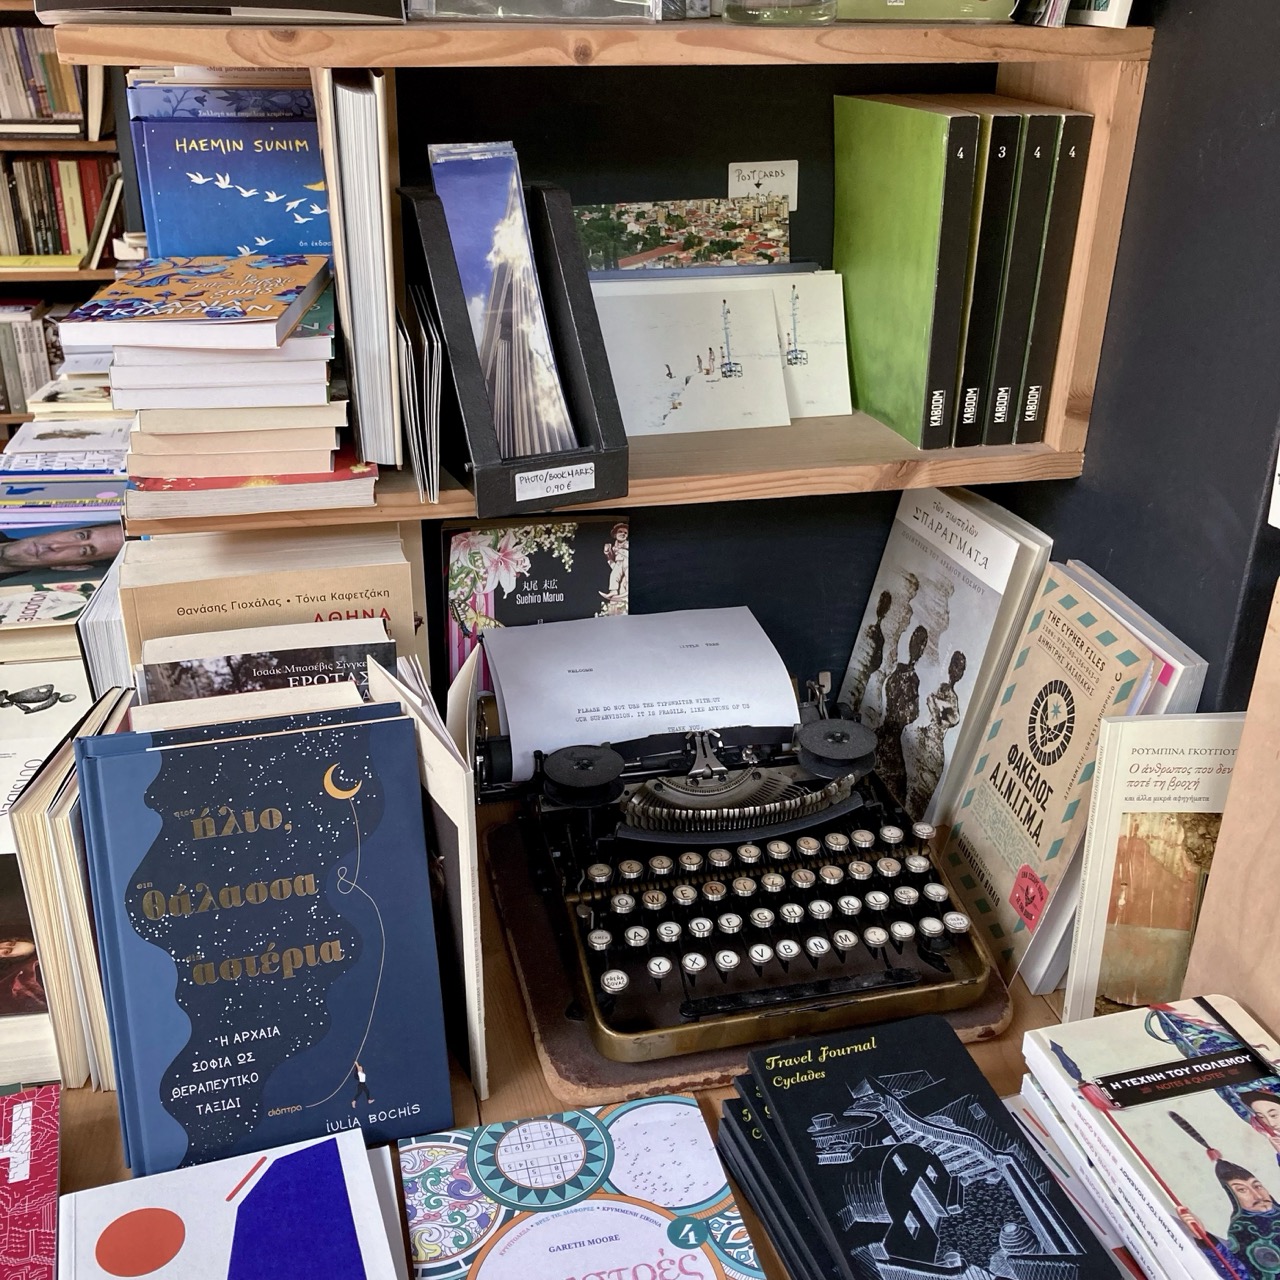 A vintage typewriter, books, and other objects at Little Tree Books and Coffee in Athens, Greece.